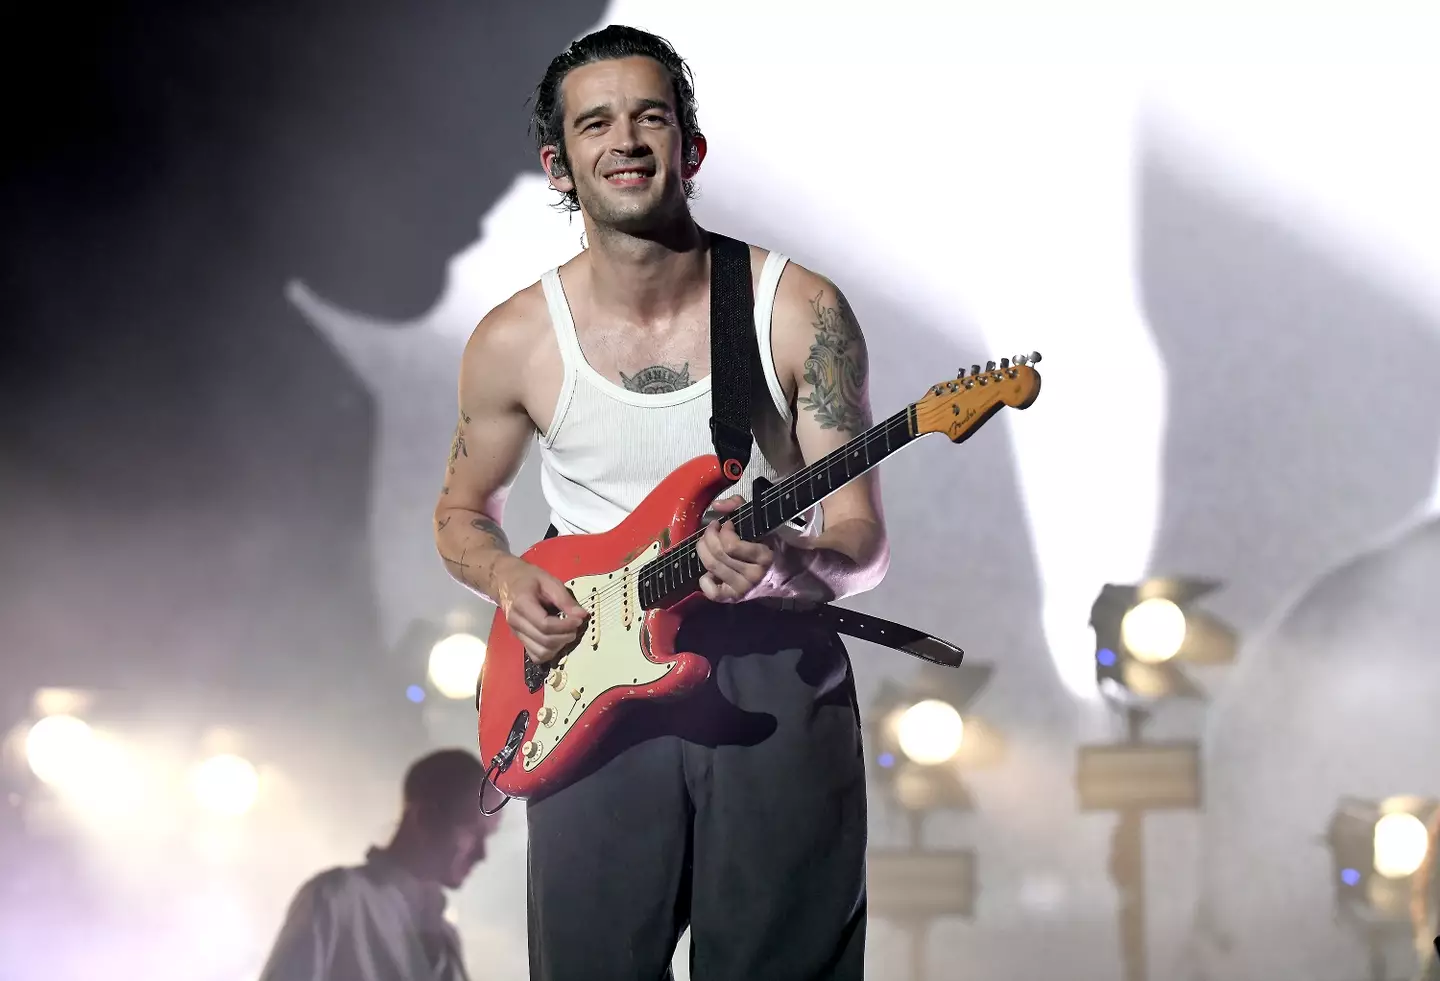 The lead singer announced the news at The 1975's latest gig.